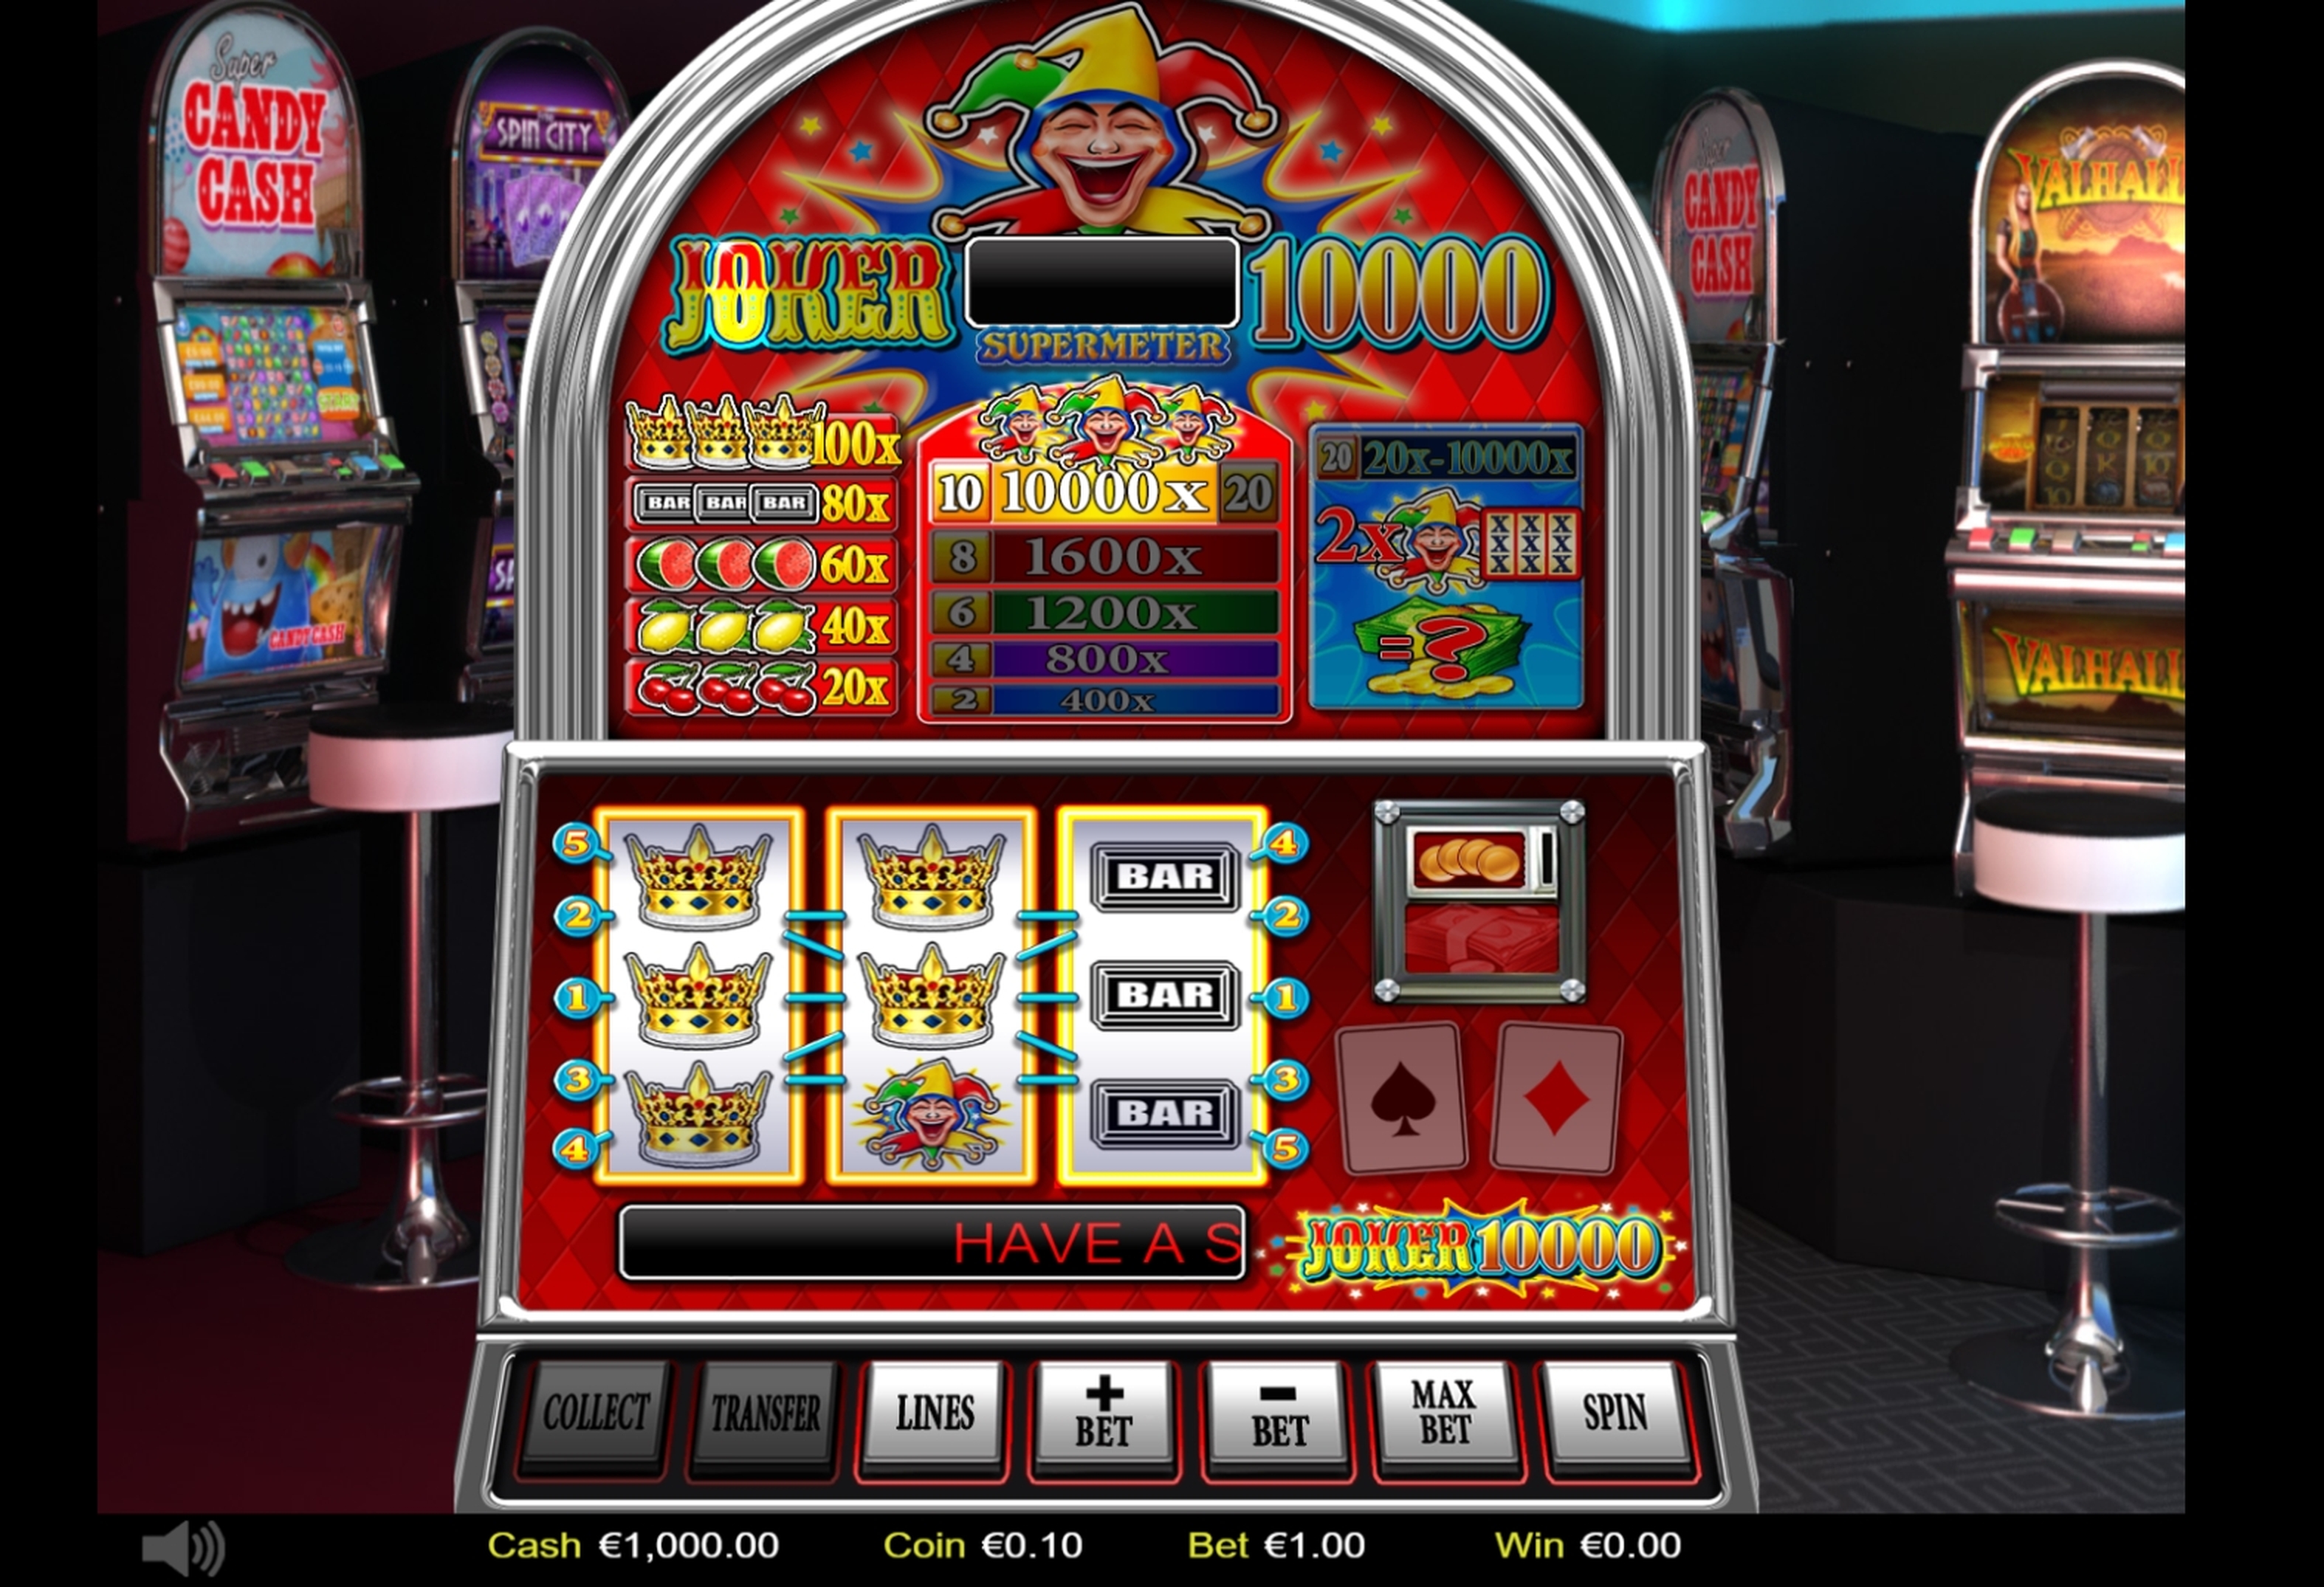 Play Joker Millions Slot Machine Free With No Download